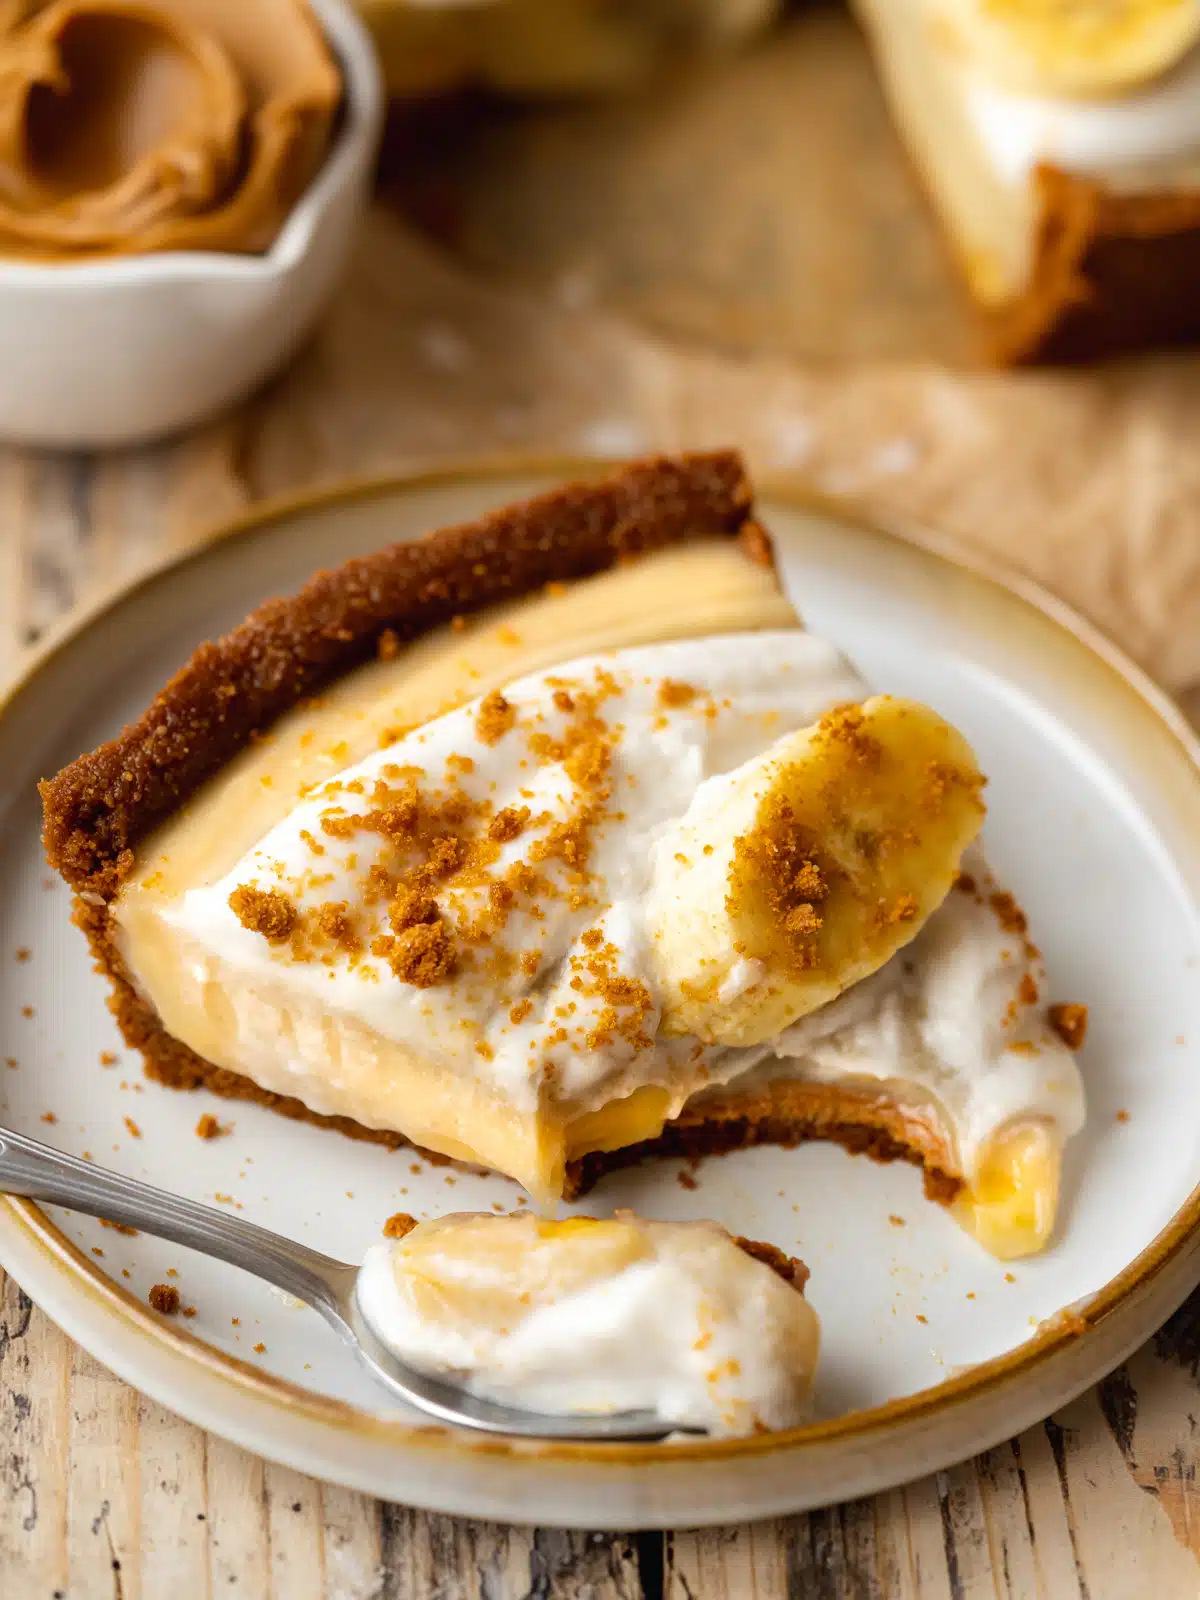 45 degree angle shot of a slice of vegan banana cream pie on a hand-hewn dessert plate with a spoonful taken out to show the distinct layers.